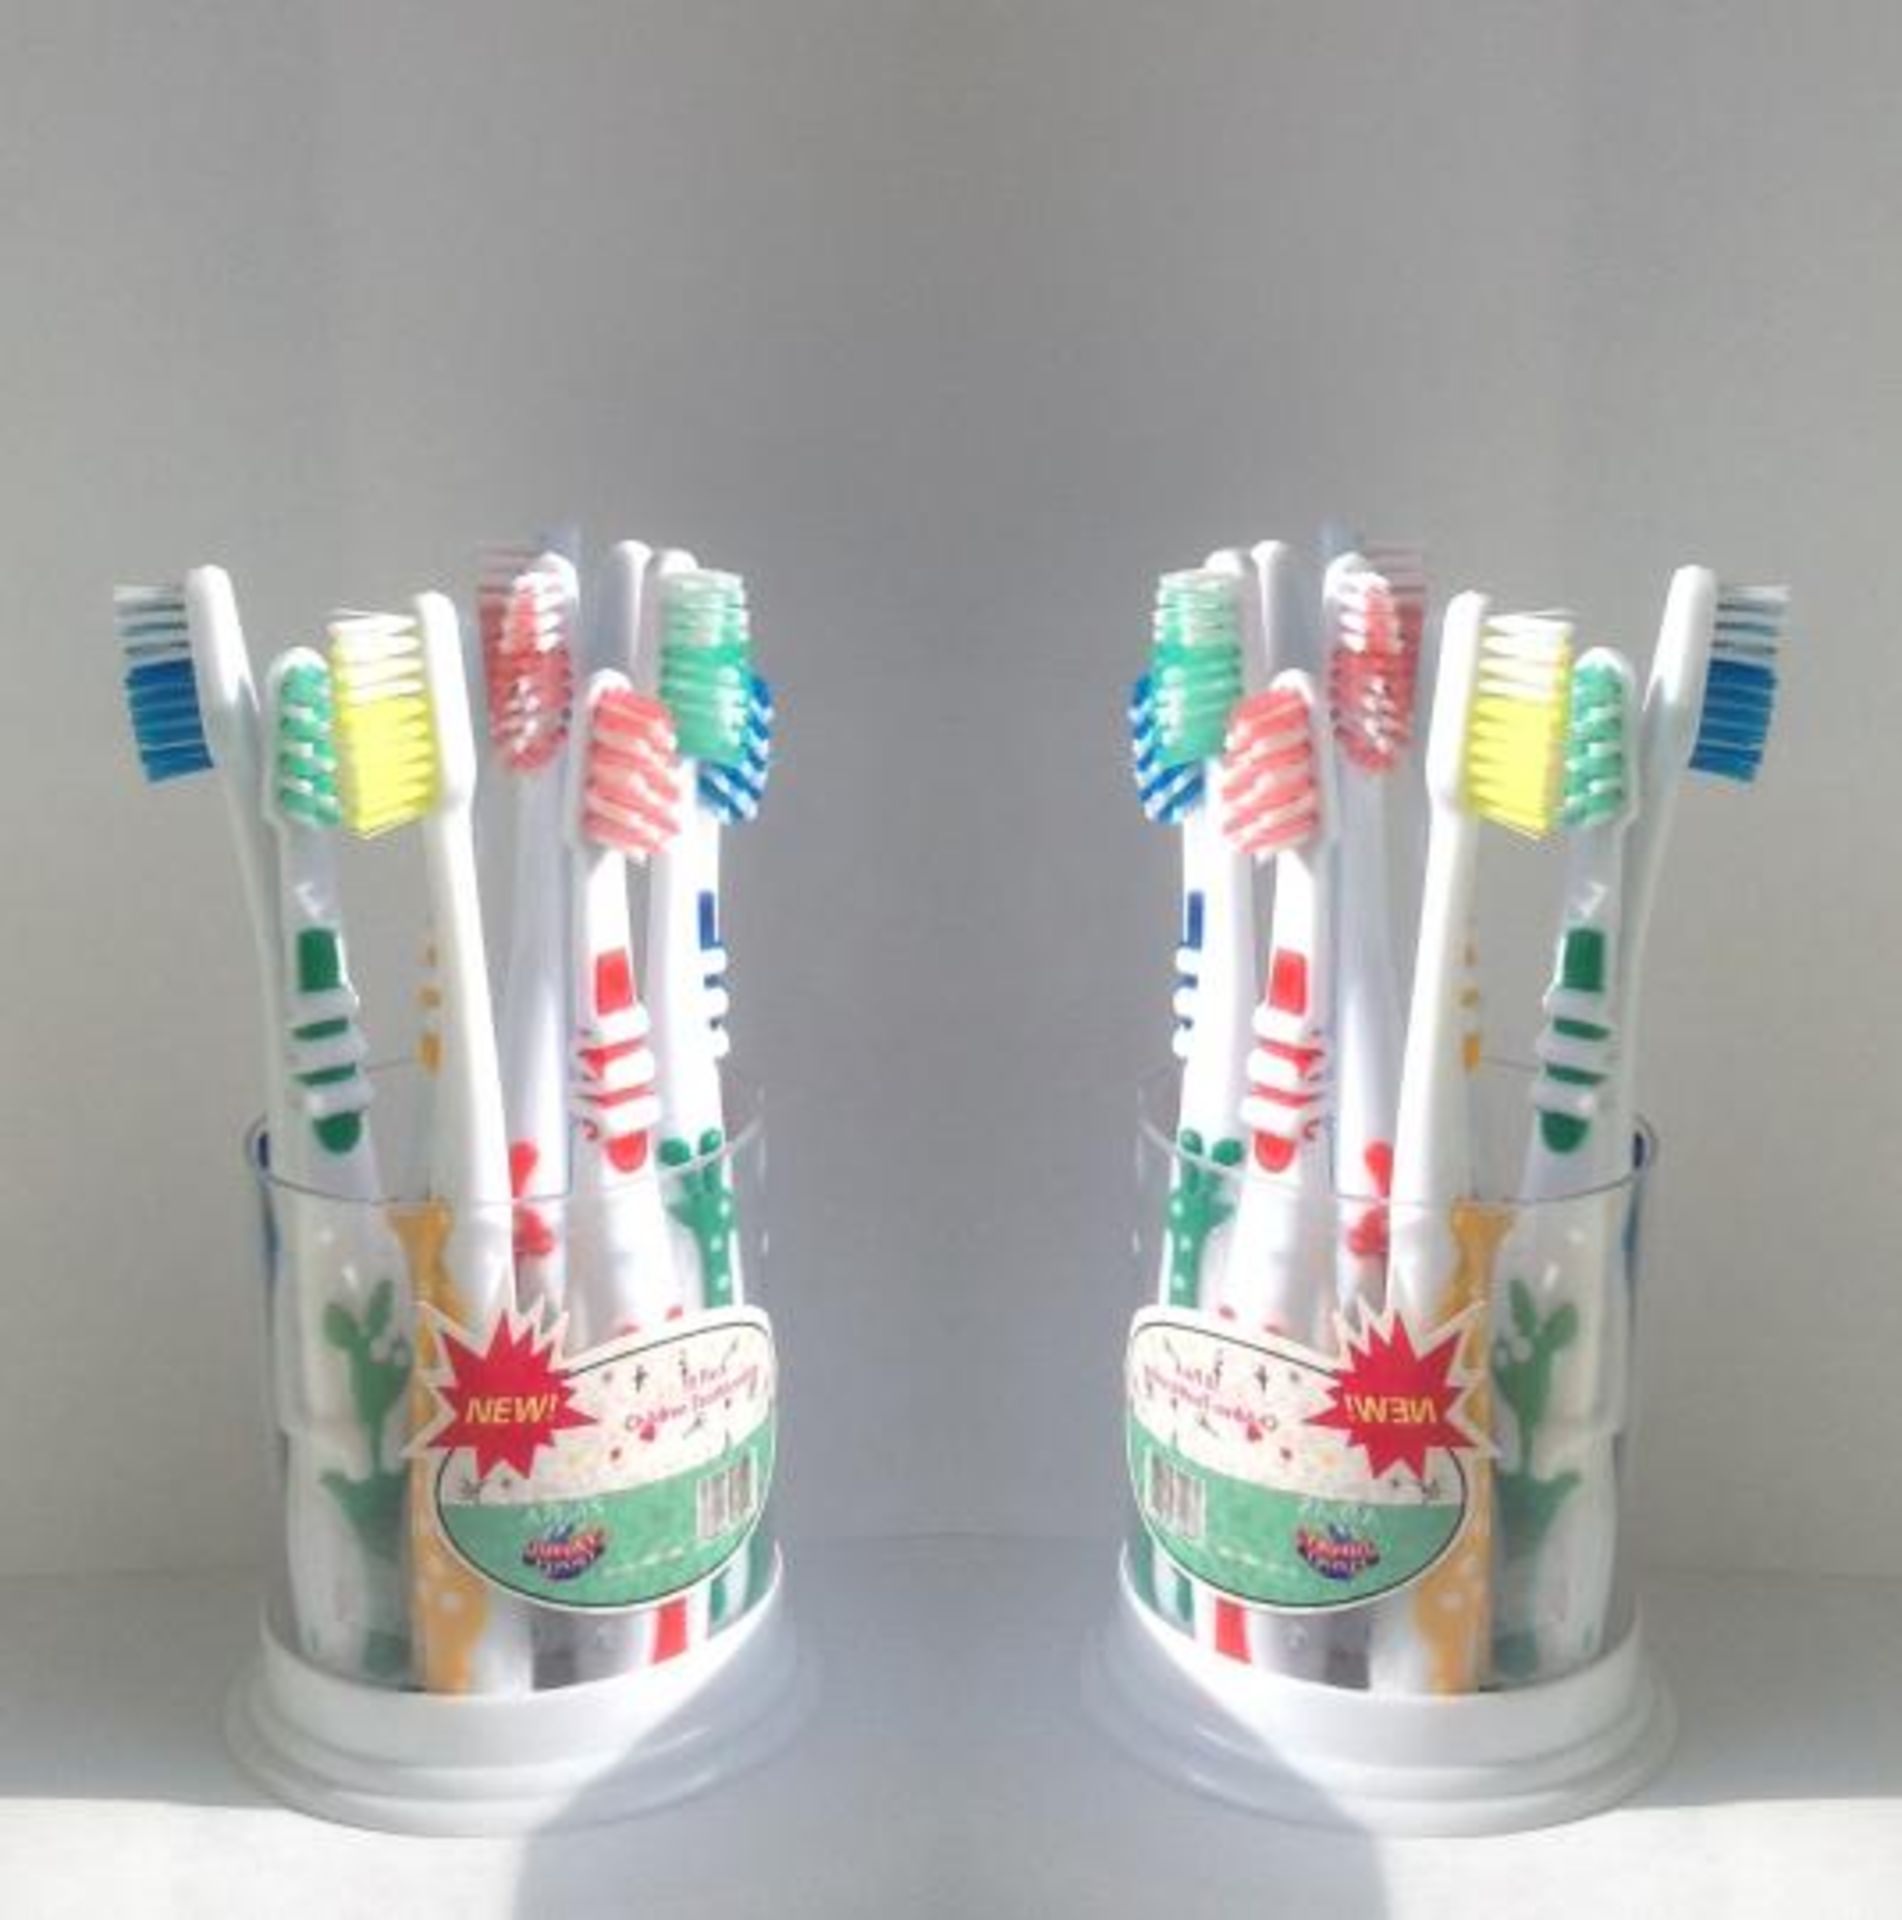 720 x Toothbrushes – in Display Tubs – NO VAT UK Delivery £20